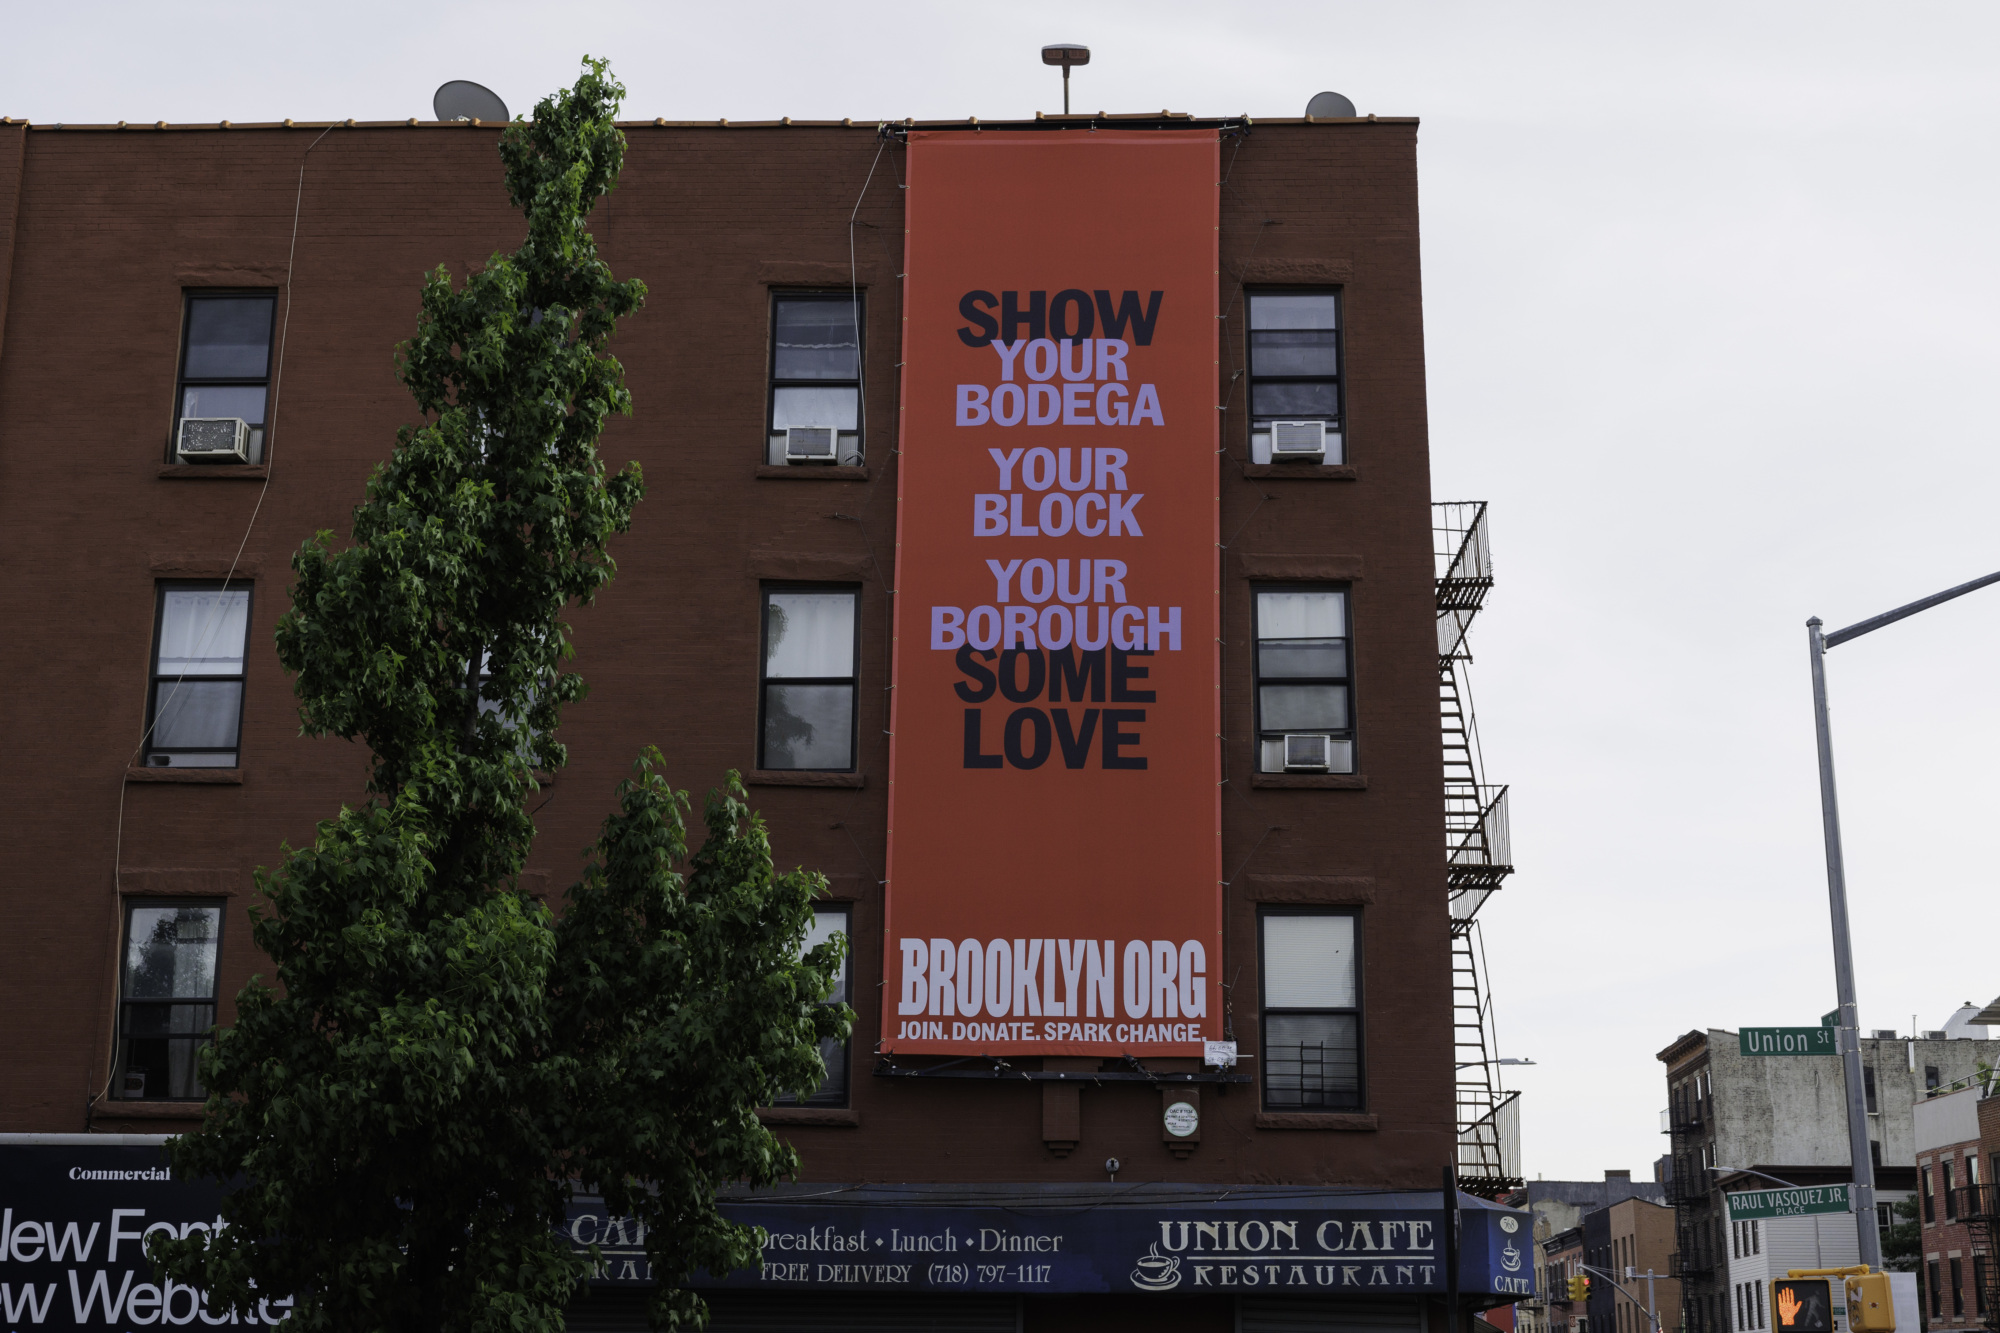 A large red banner on a building reads, "Show your bodega your block your borough some love - Give to Brooklyn at BROOKLYN.ORG Join. Donate. Spark Change." The building's street signs indicate Union Street.